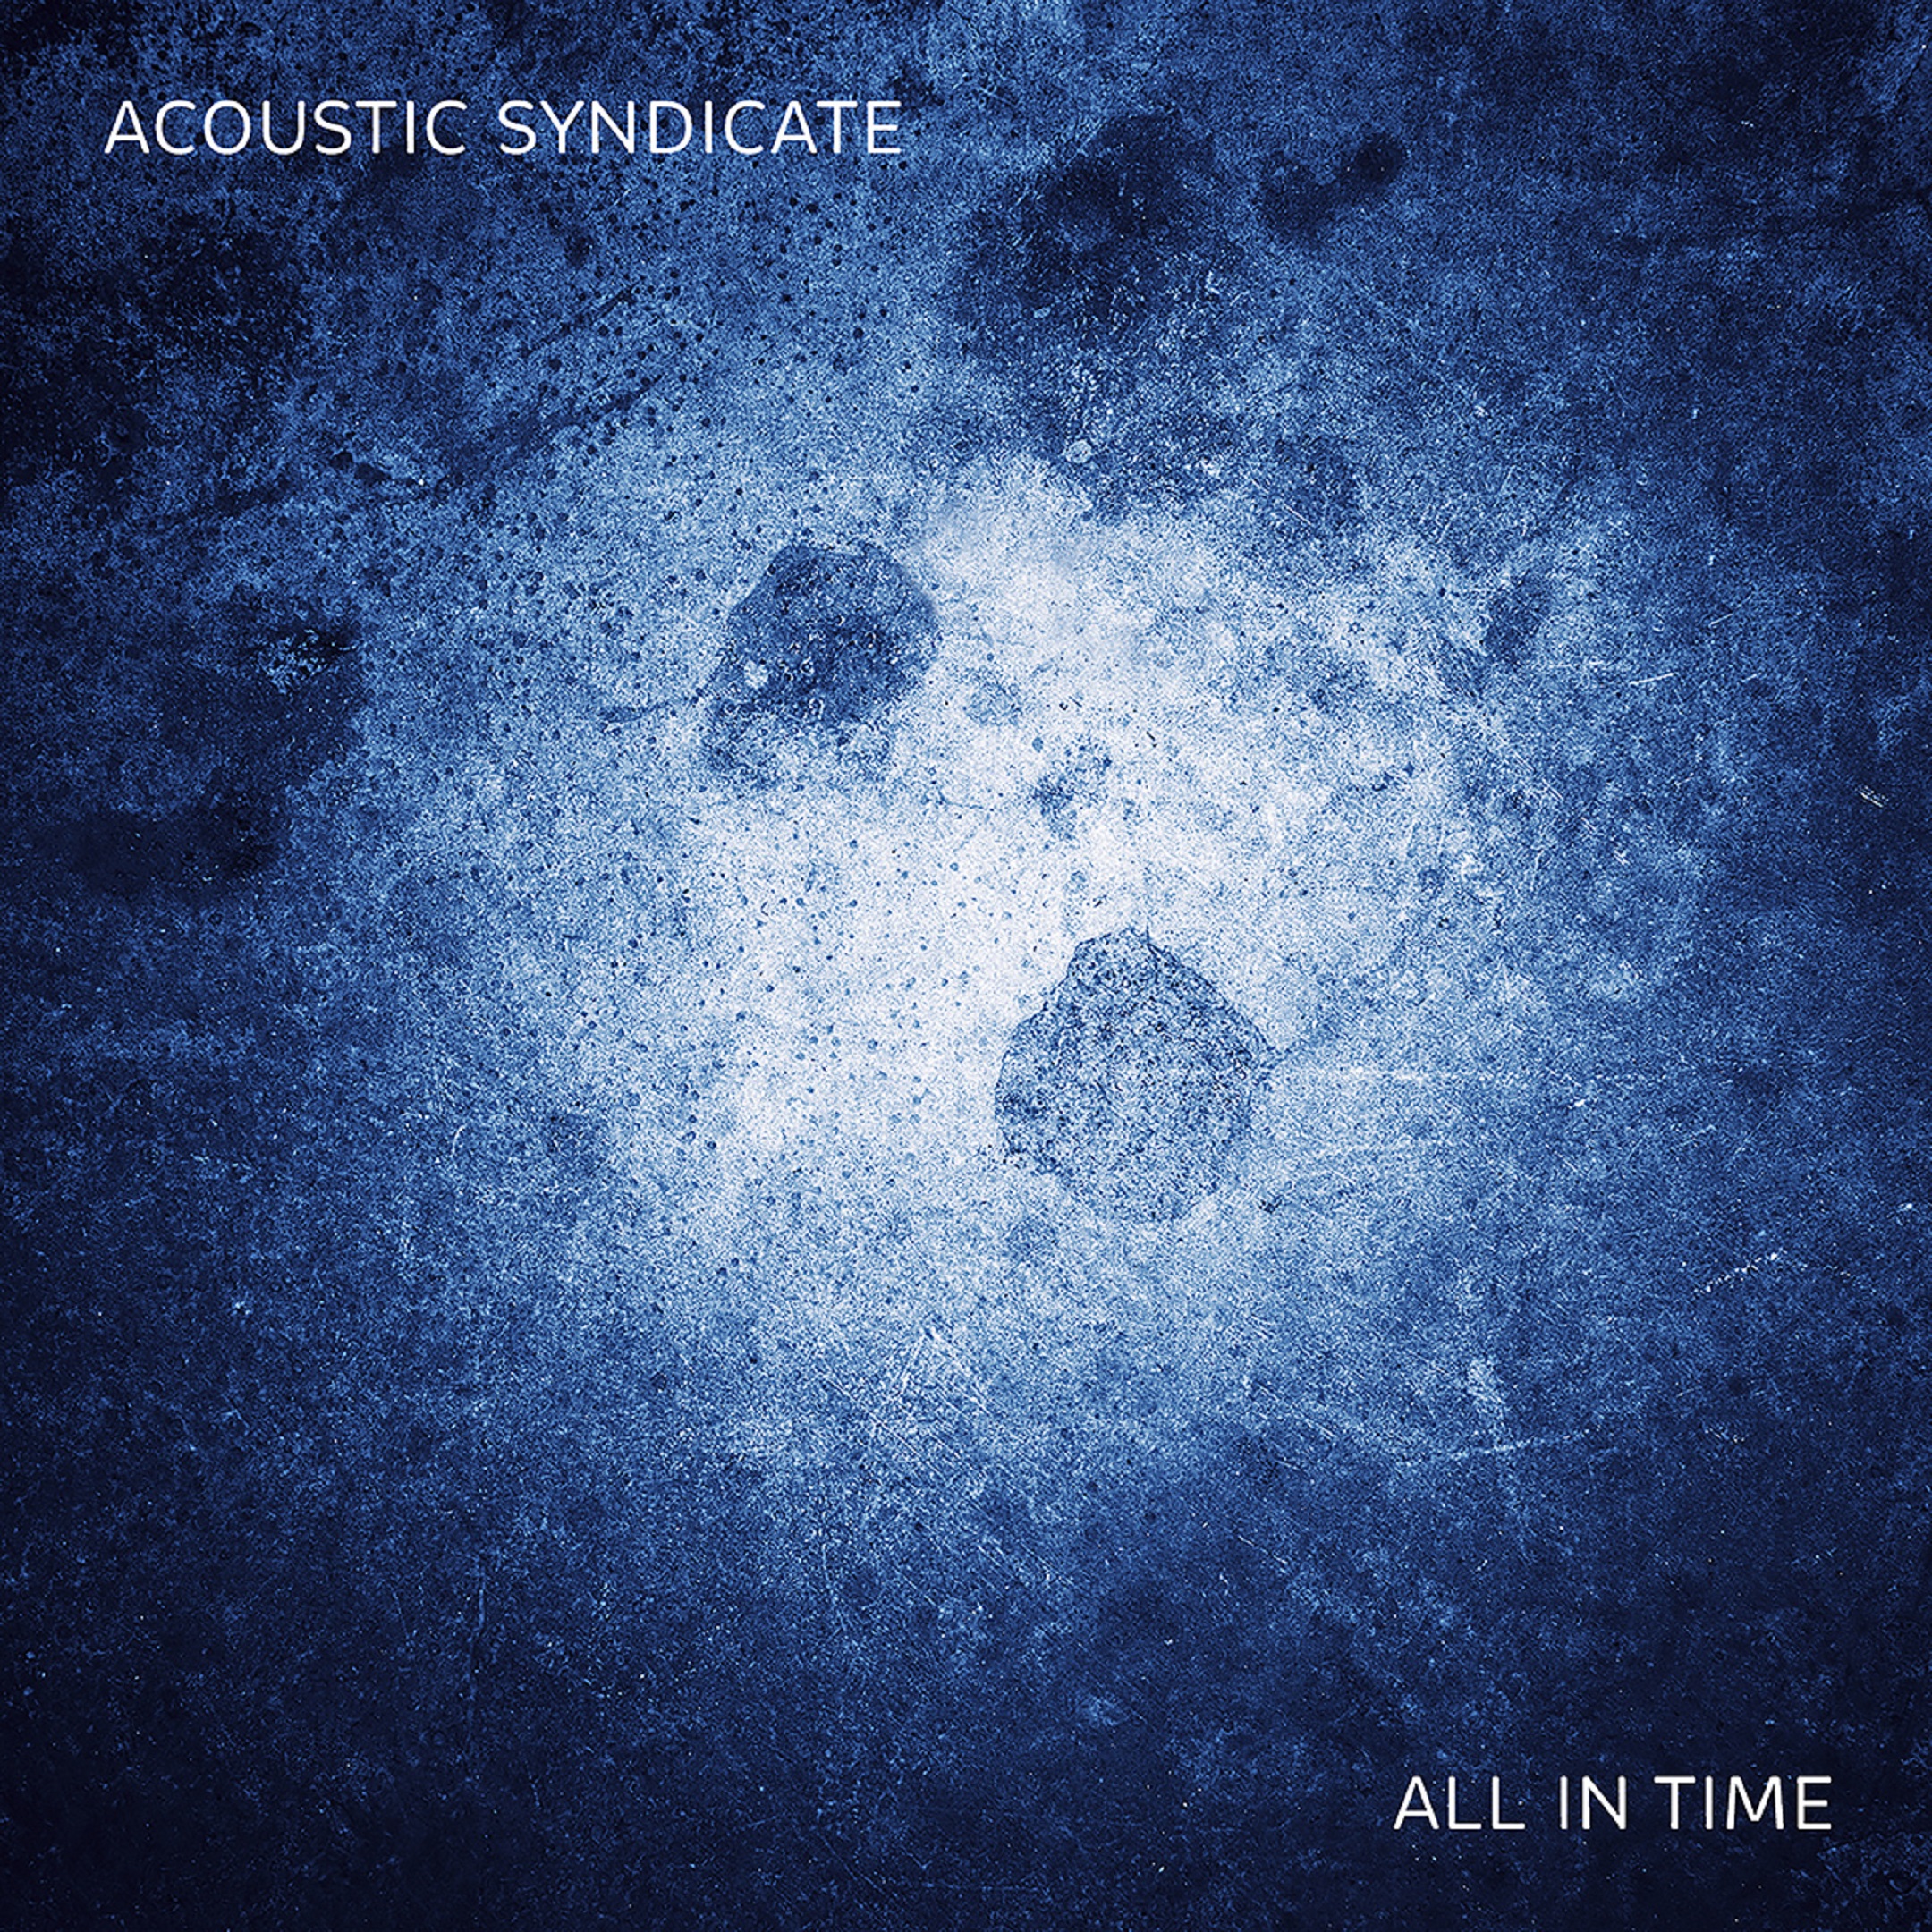 Acoustic Syndicate announces upcoming album, All In Time